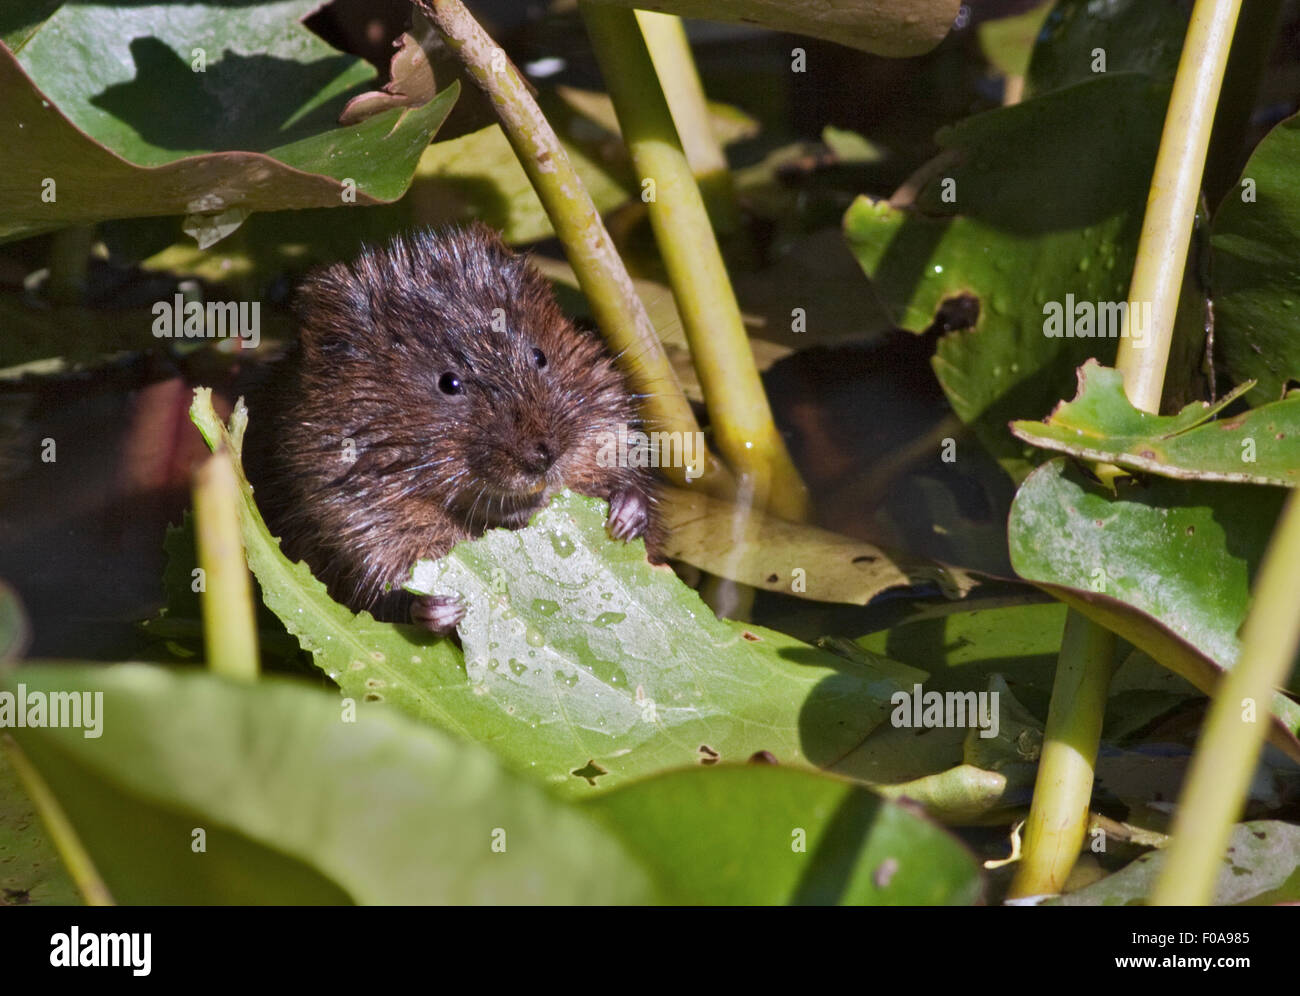 European Water Vole (arvicola amphibius) eating Water Lily leaf, Wetland Centre, Arundel, West Sussex, England Stock Photo